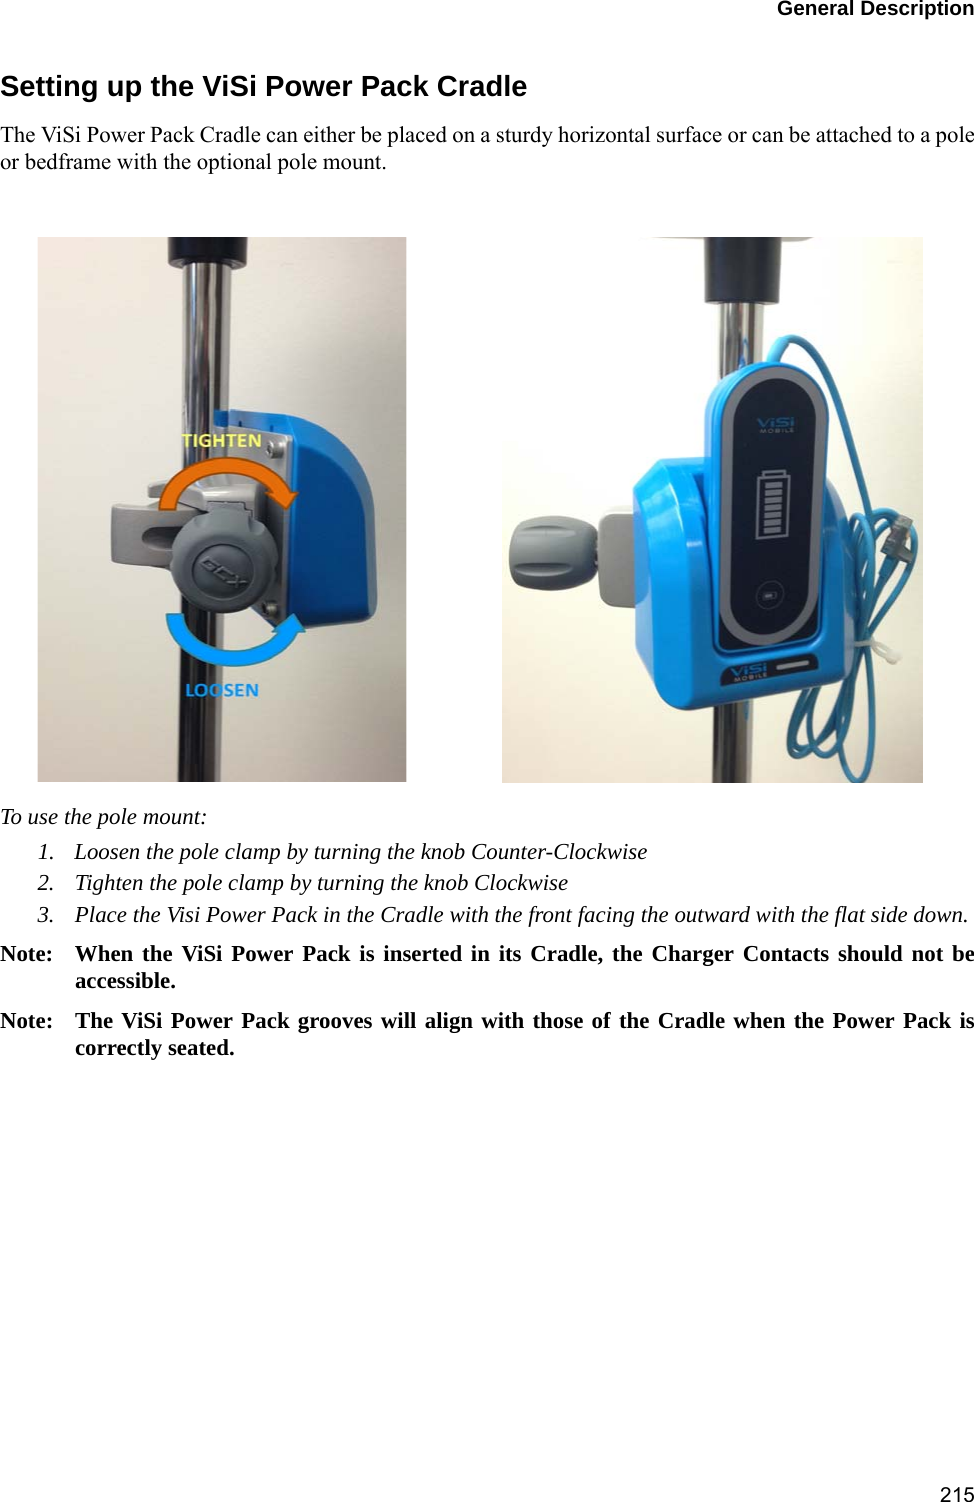 General Description215Setting up the ViSi Power Pack CradleThe ViSi Power Pack Cradle can either be placed on a sturdy horizontal surface or can be attached to a poleor bedframe with the optional pole mount.To use the pole mount:1. Loosen the pole clamp by turning the knob Counter-Clockwise2. Tighten the pole clamp by turning the knob Clockwise3. Place the Visi Power Pack in the Cradle with the front facing the outward with the flat side down. Note: When the ViSi Power Pack is inserted in its Cradle, the Charger Contacts should not beaccessible. Note: The ViSi Power Pack grooves will align with those of the Cradle when the Power Pack iscorrectly seated. 